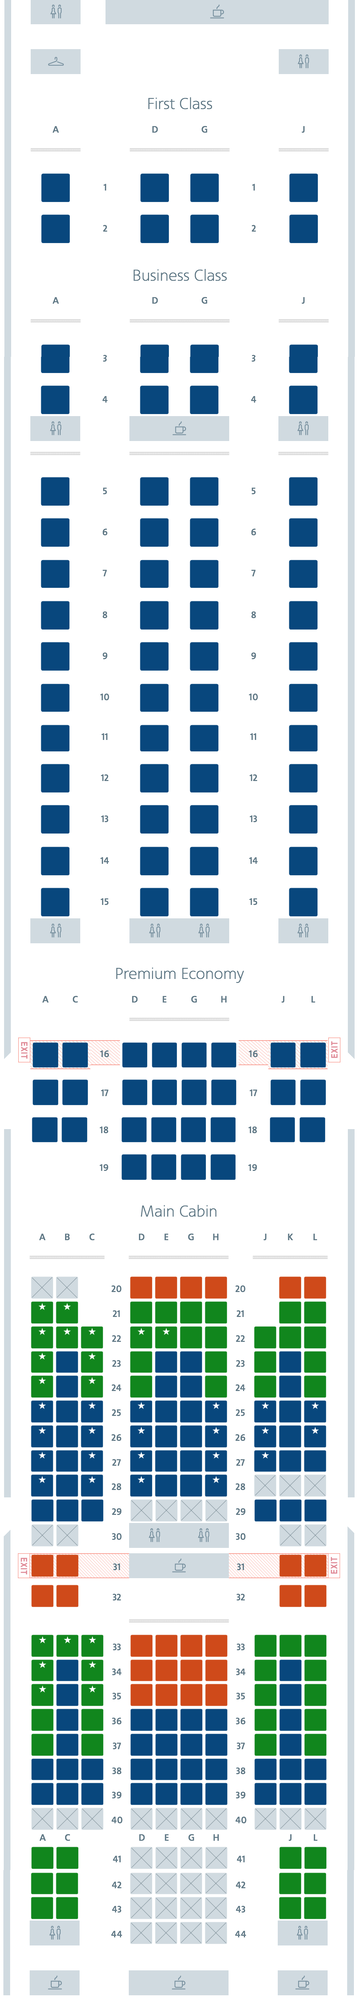 American Airlines Flight 102 Seating Chart